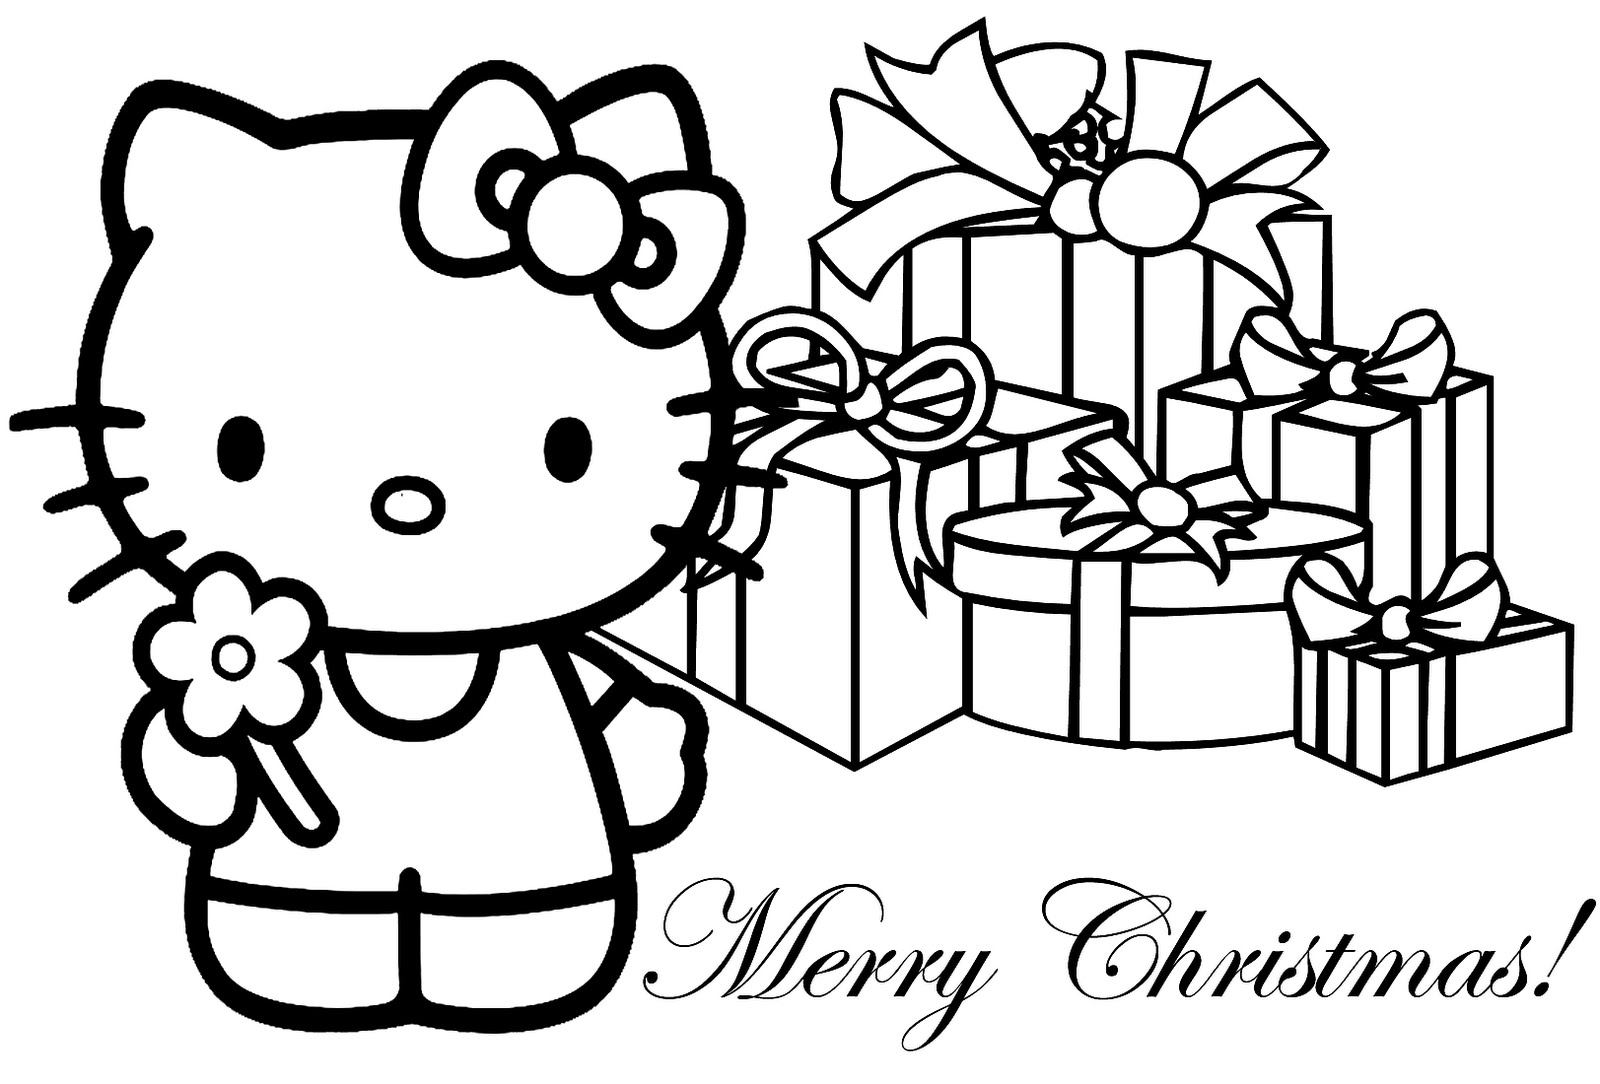 Hello Kitty Christmas Coloring Sheets Coloring Wallpapers Download Free Images Wallpaper [coloring654.blogspot.com]